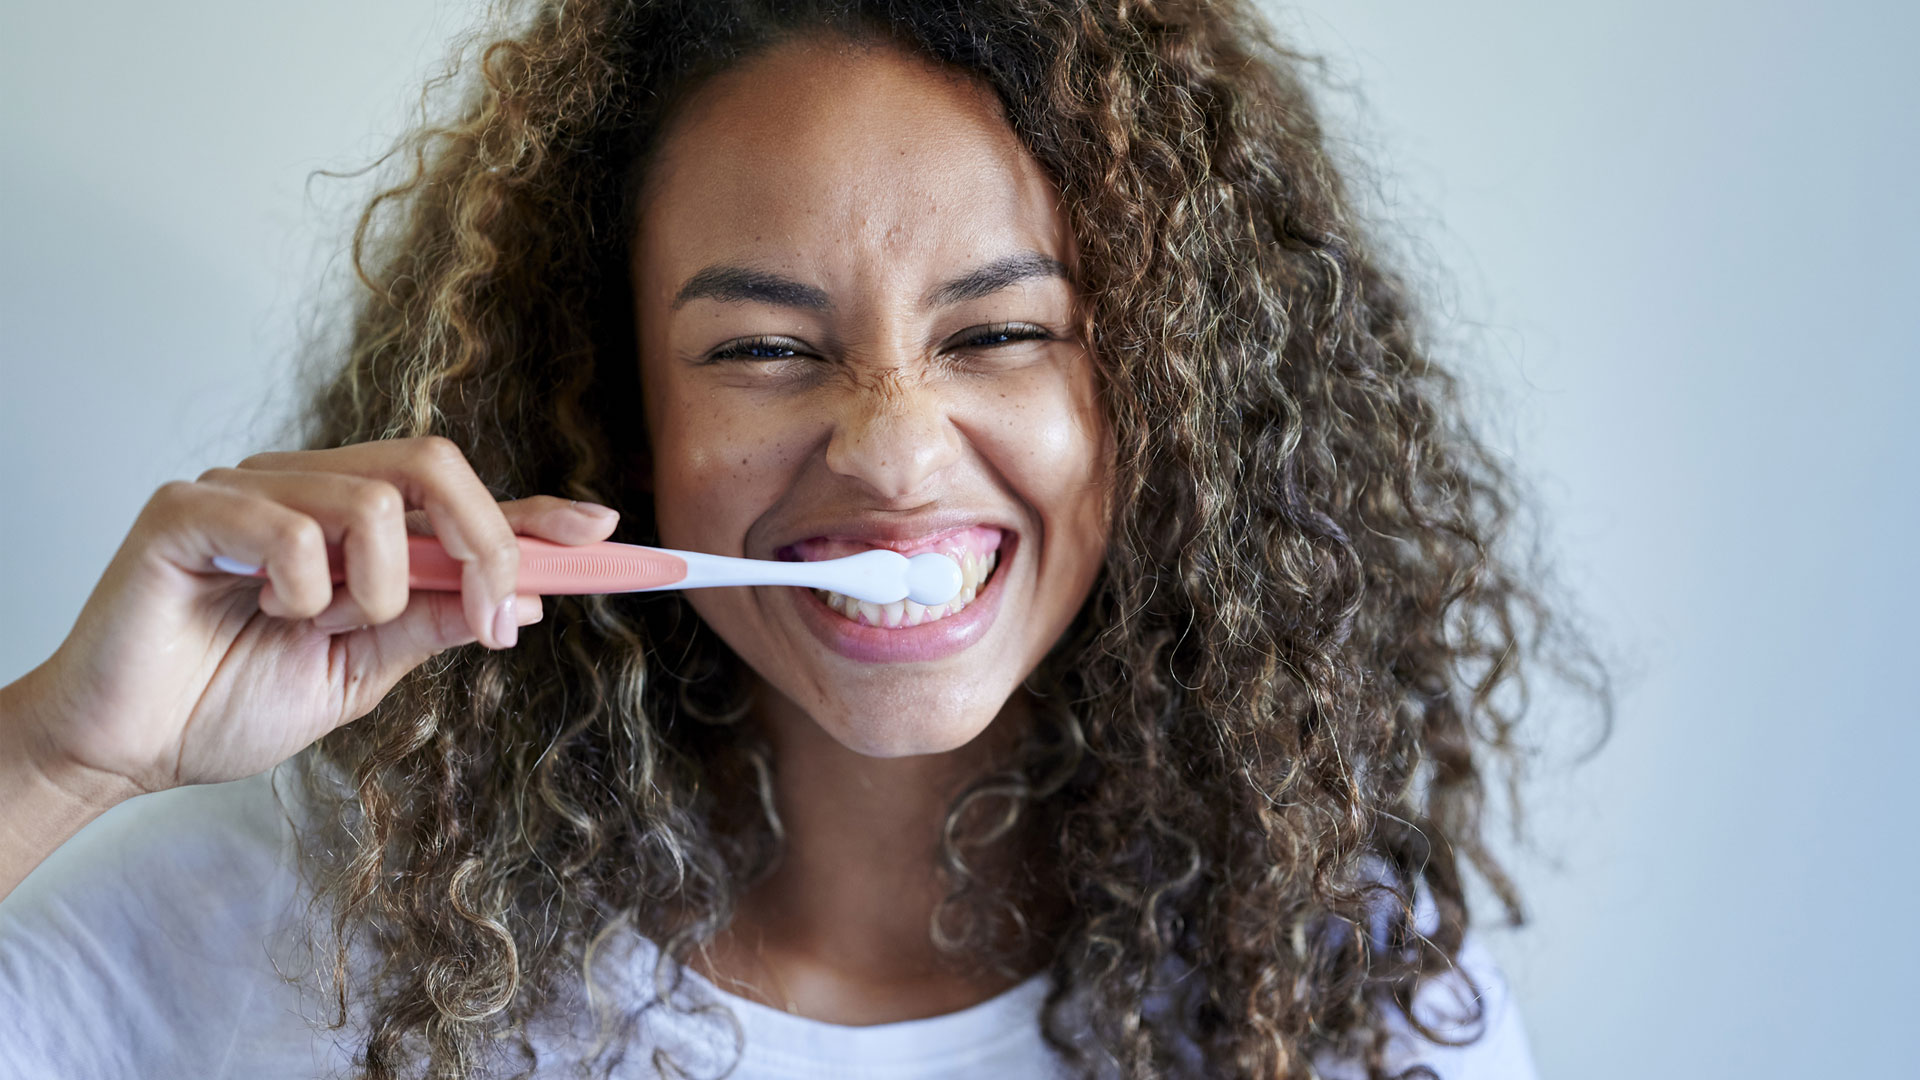 How Many Teeth Do Humans Have? image shows woman brushing teeth